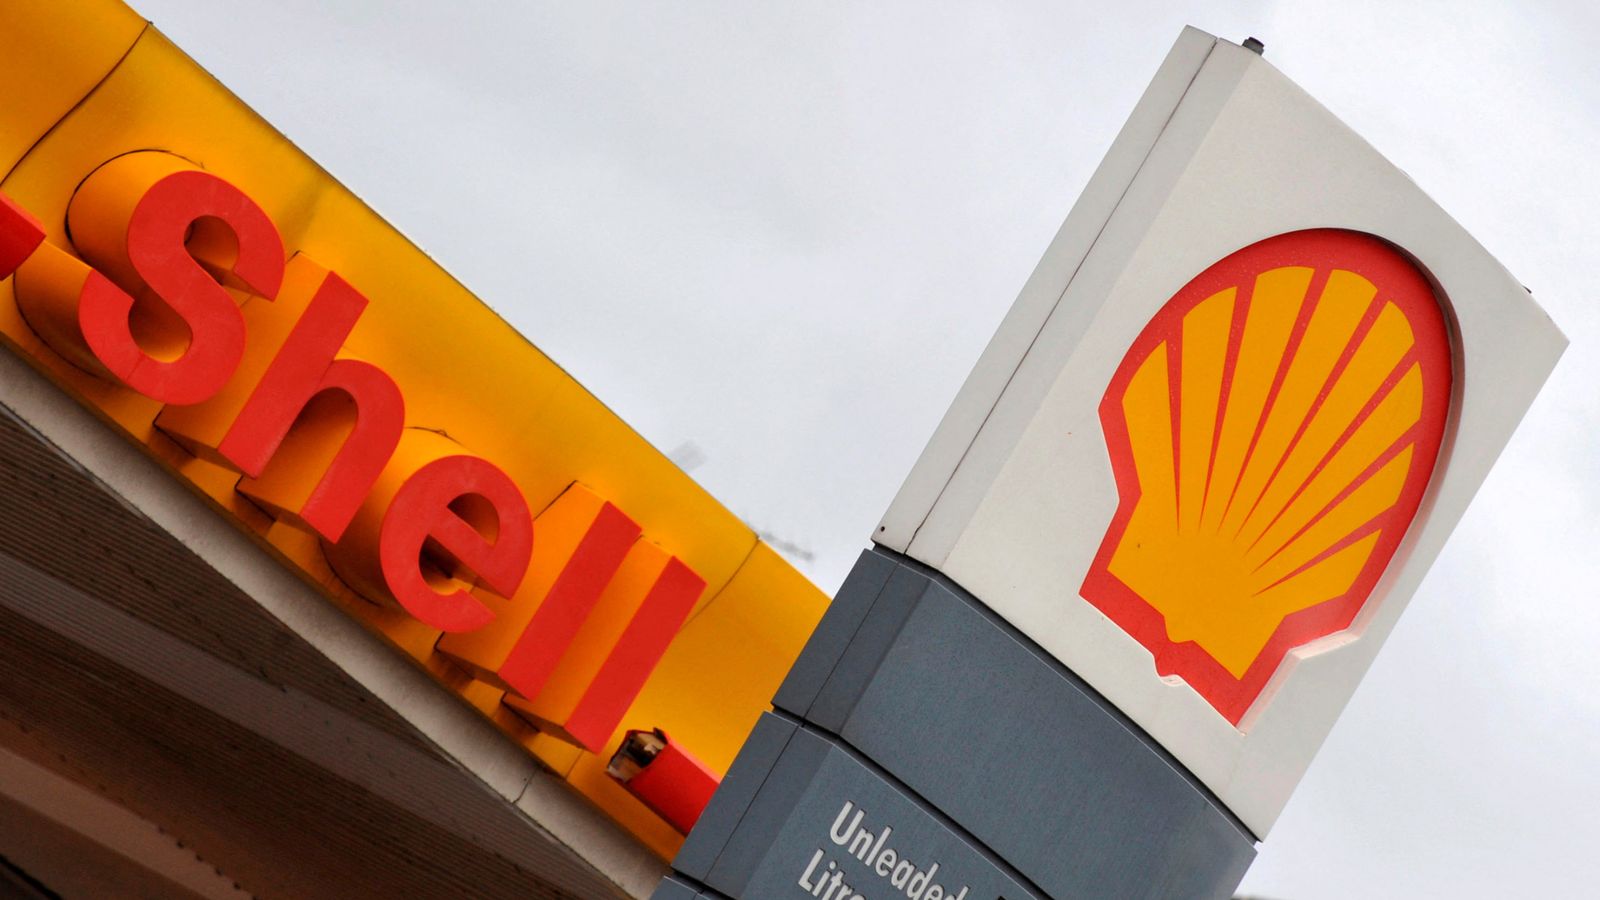 Energy company Shell reports profits of $9.5bn for Q3 of 2022 but not at record levels seen in first half of year